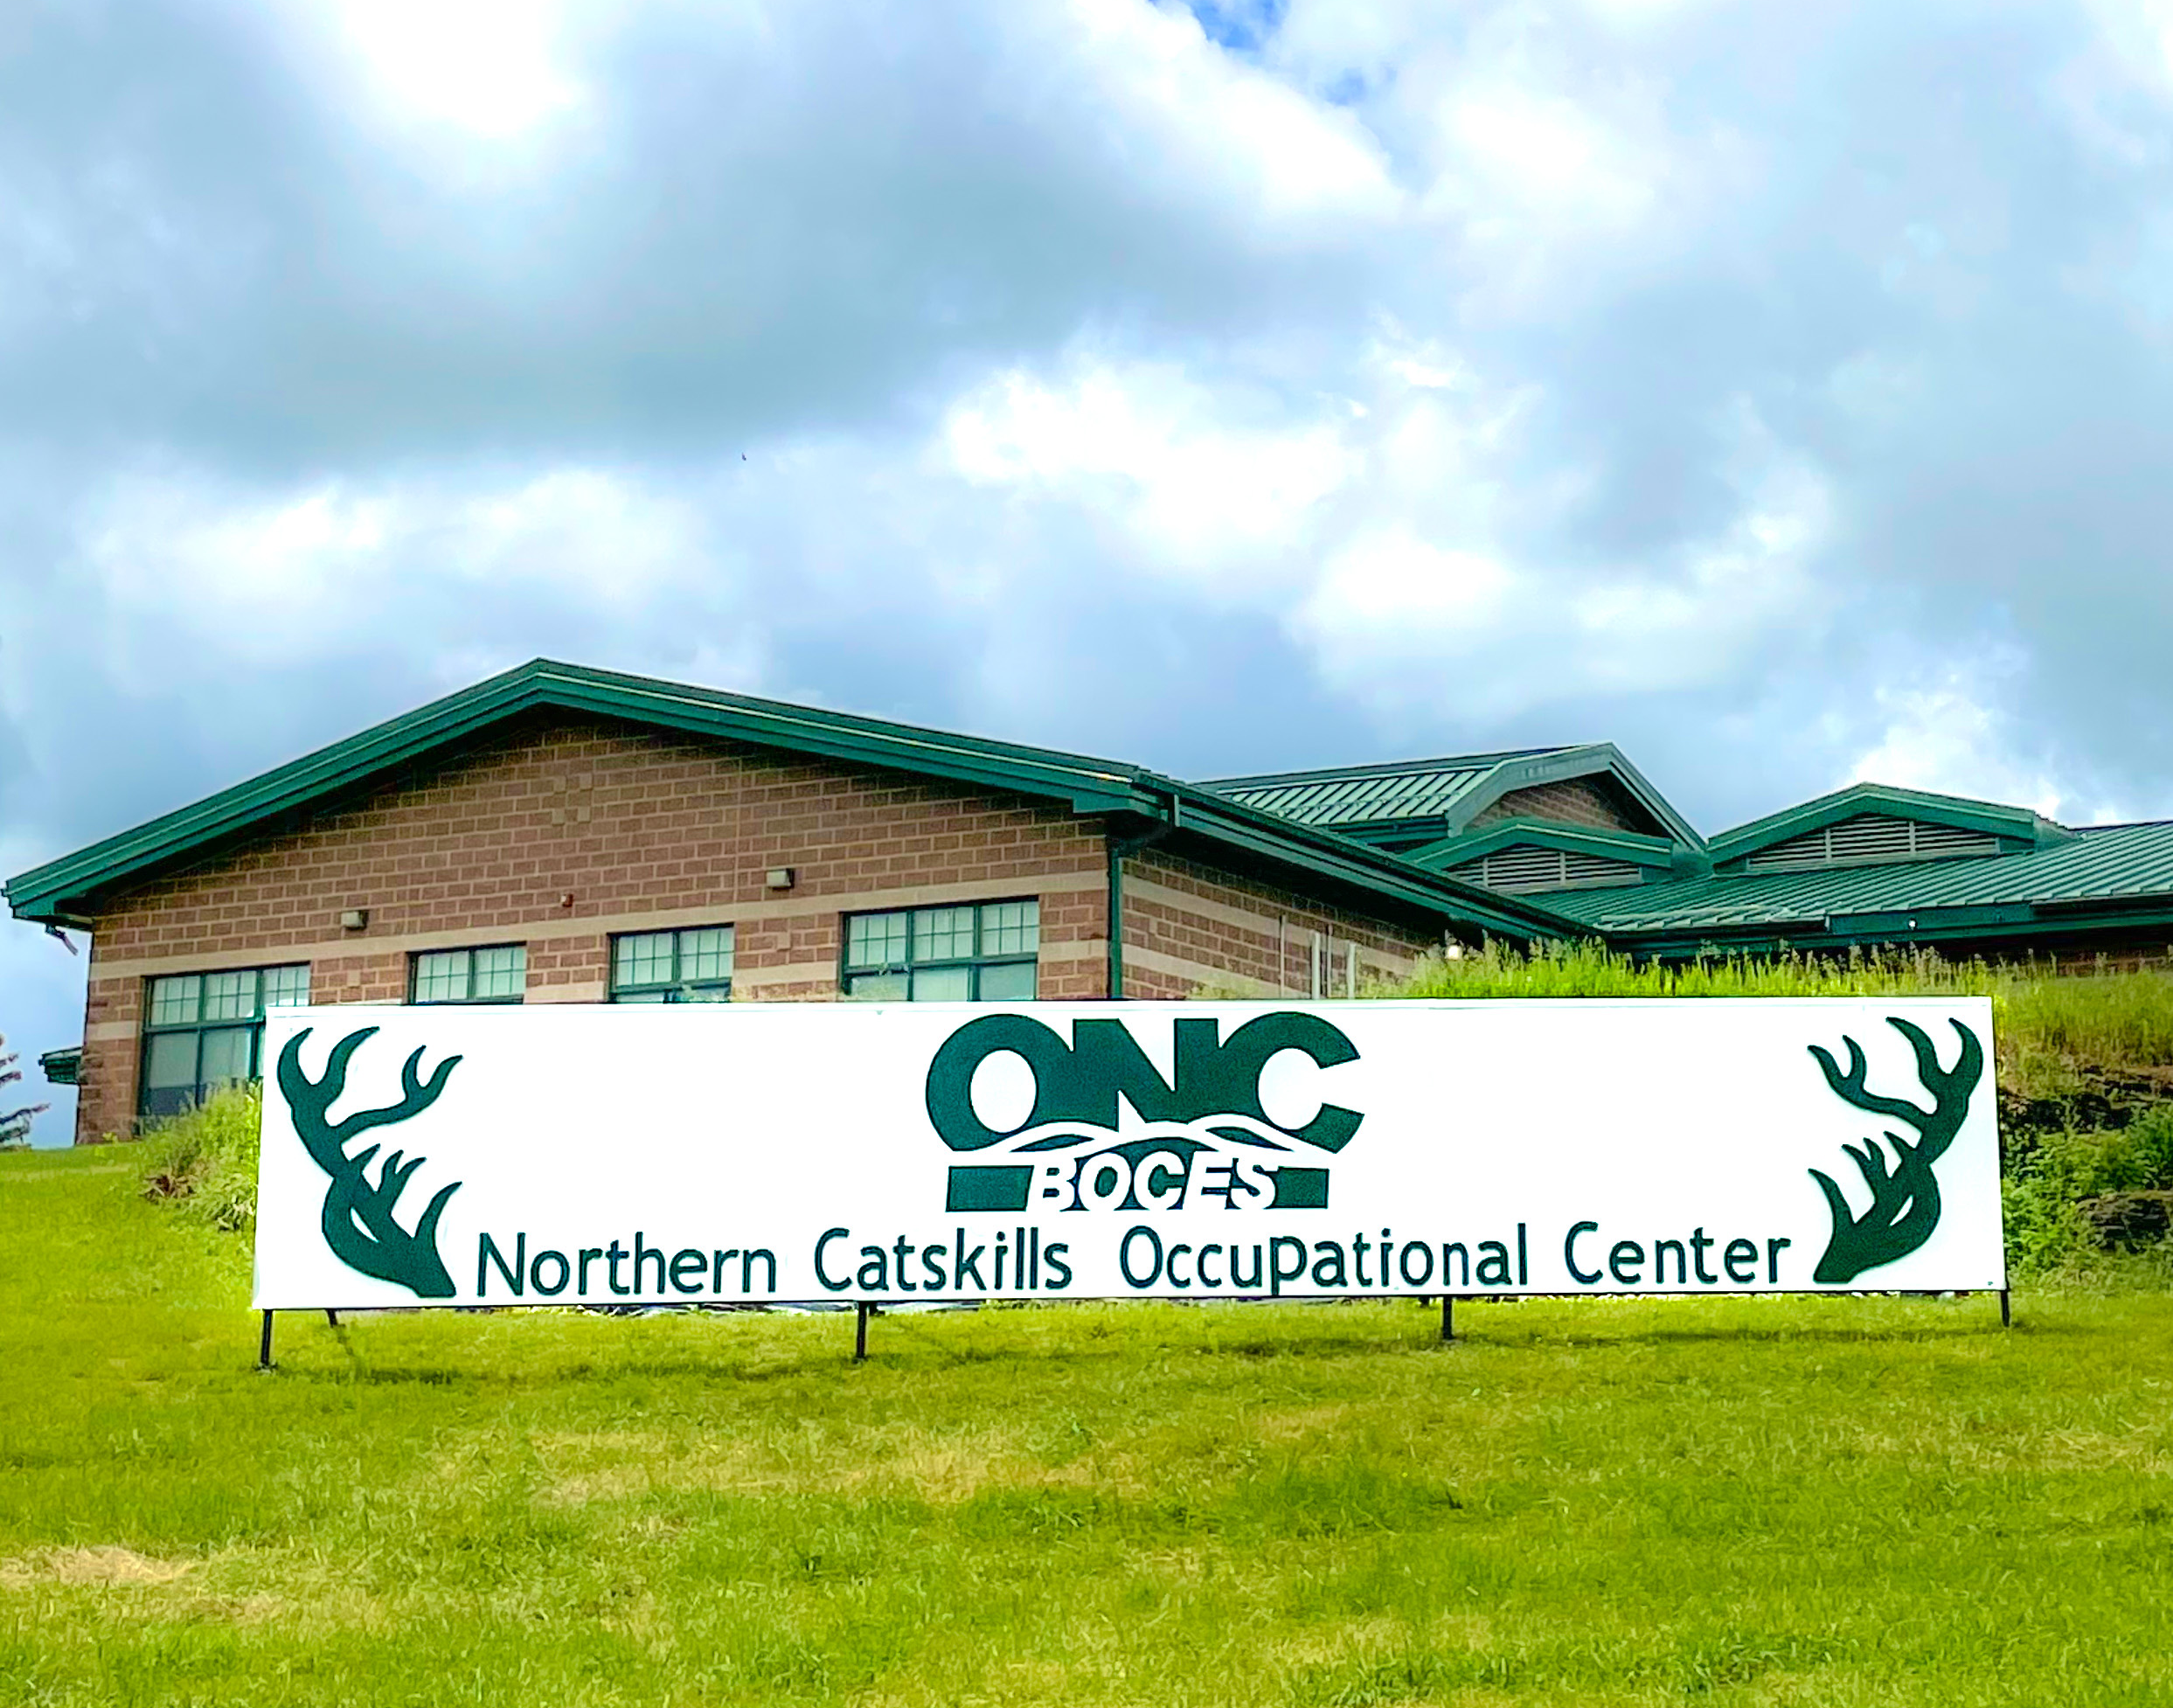 Outside look of Northern Catskills Occupational Center